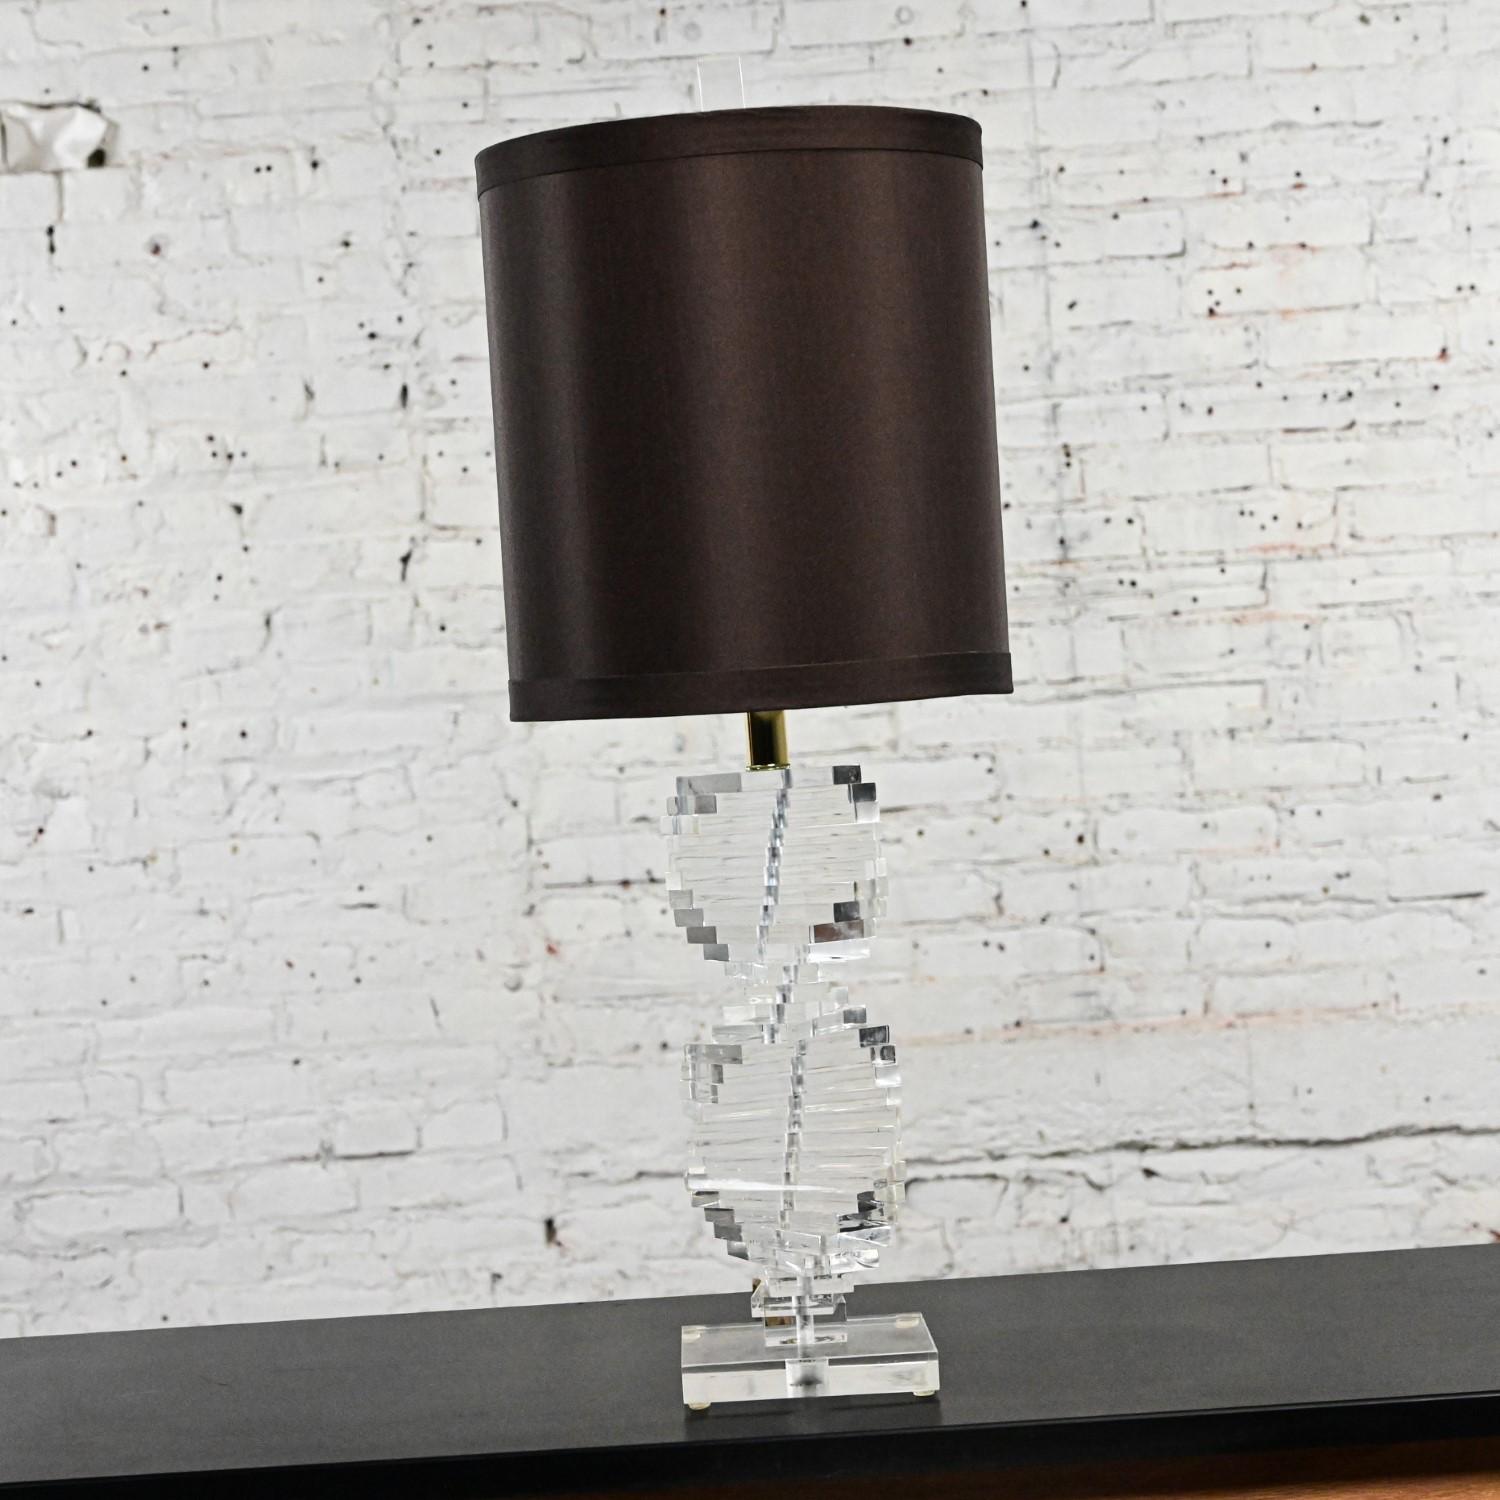 Fabulous Modern to Postmodern Helix spiral stacked Lucite table lamp by Bauer Co. Inc. with a new tall narrow espresso fabric hardback lined drum shade. Beautiful condition, keeping in mind that this is vintage and not new so will have signs of use